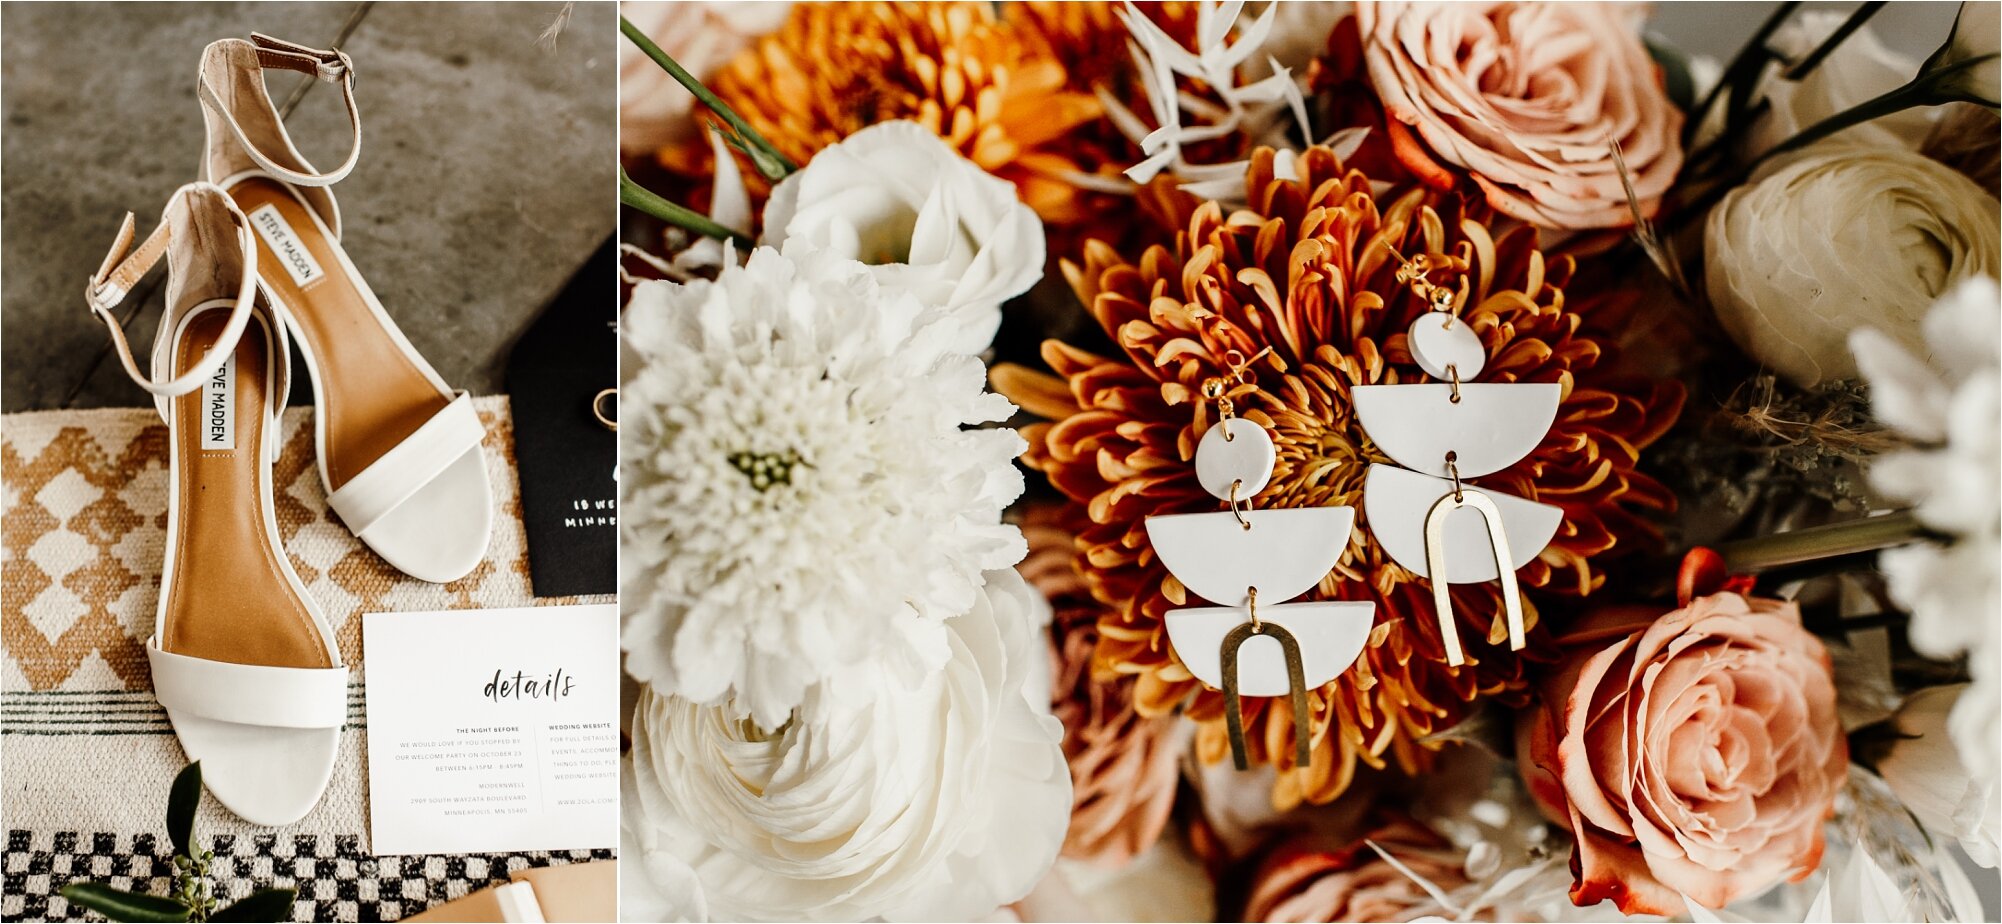  wedding day details, invitations, florals, steve madden shoes, clay earrings 